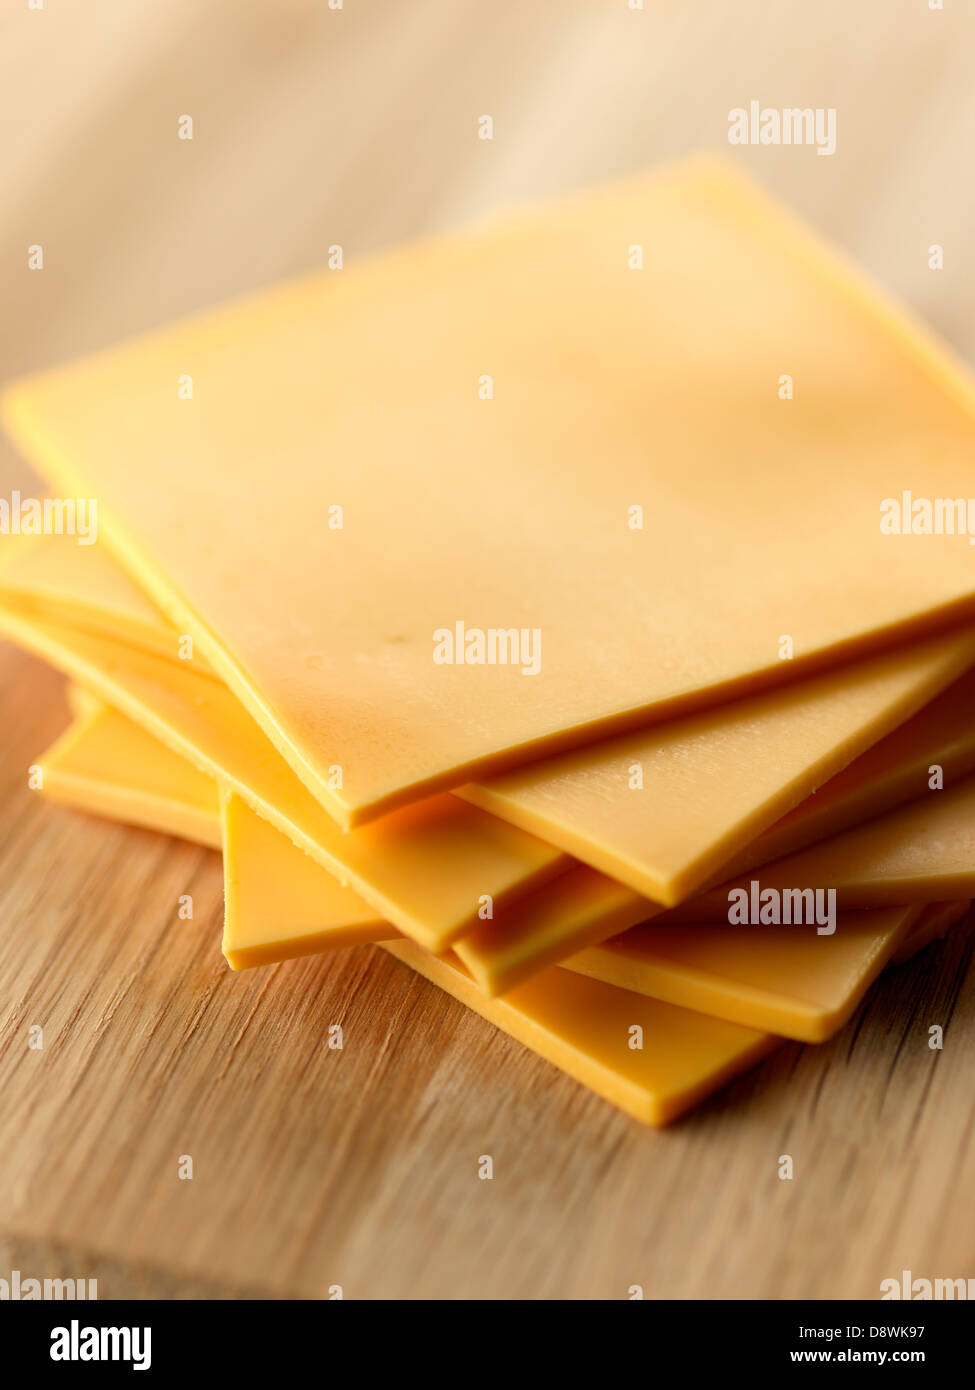 Slices of Cheddar Stock Photo